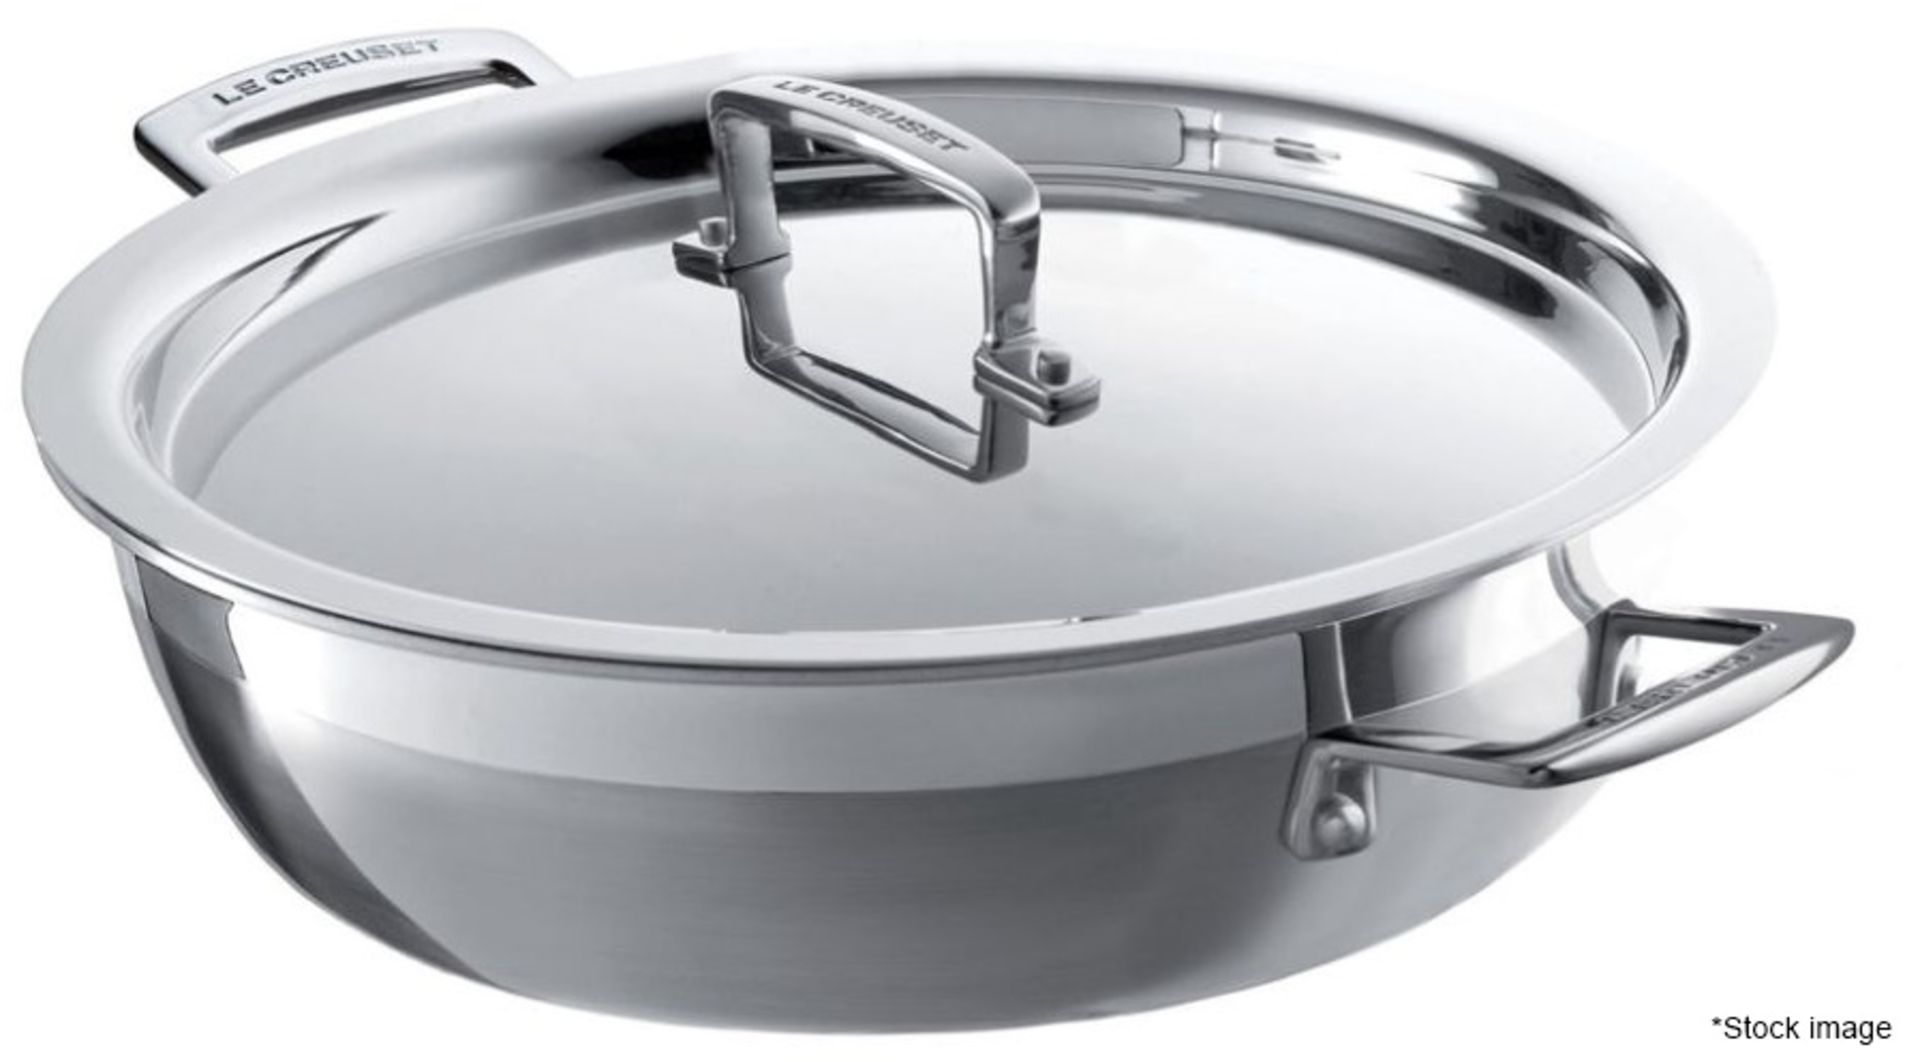 1 x LE CREUSET 3-Ply Stainless Steel Shallow Casserole Dish (26cm) - Original Price £135.00